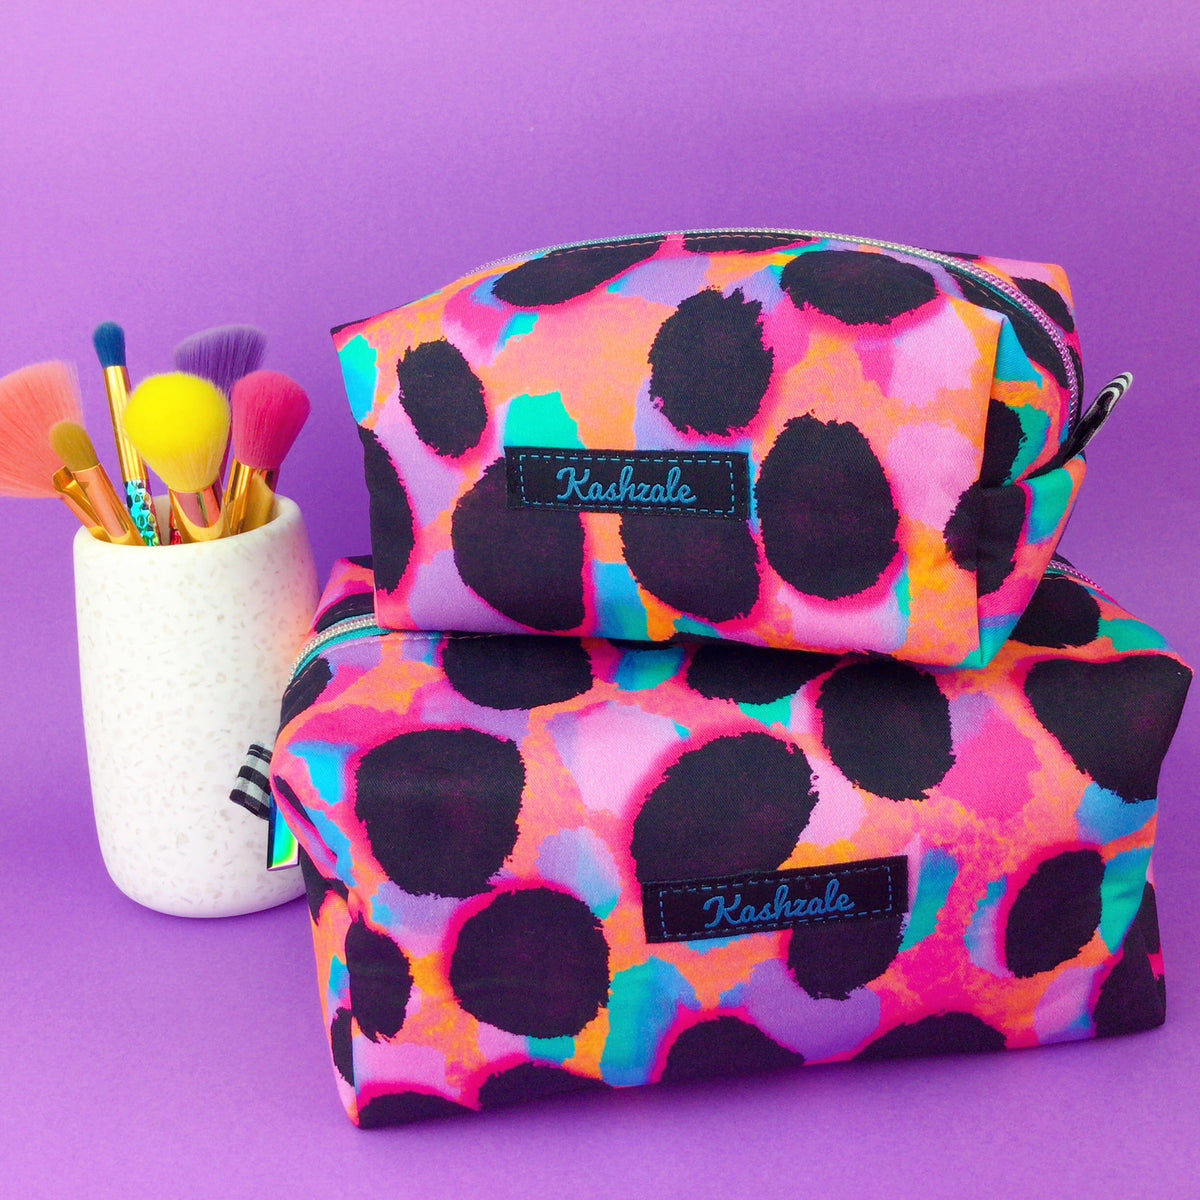 Bright Colourful small and large rectangular makeup bags on purple background. 